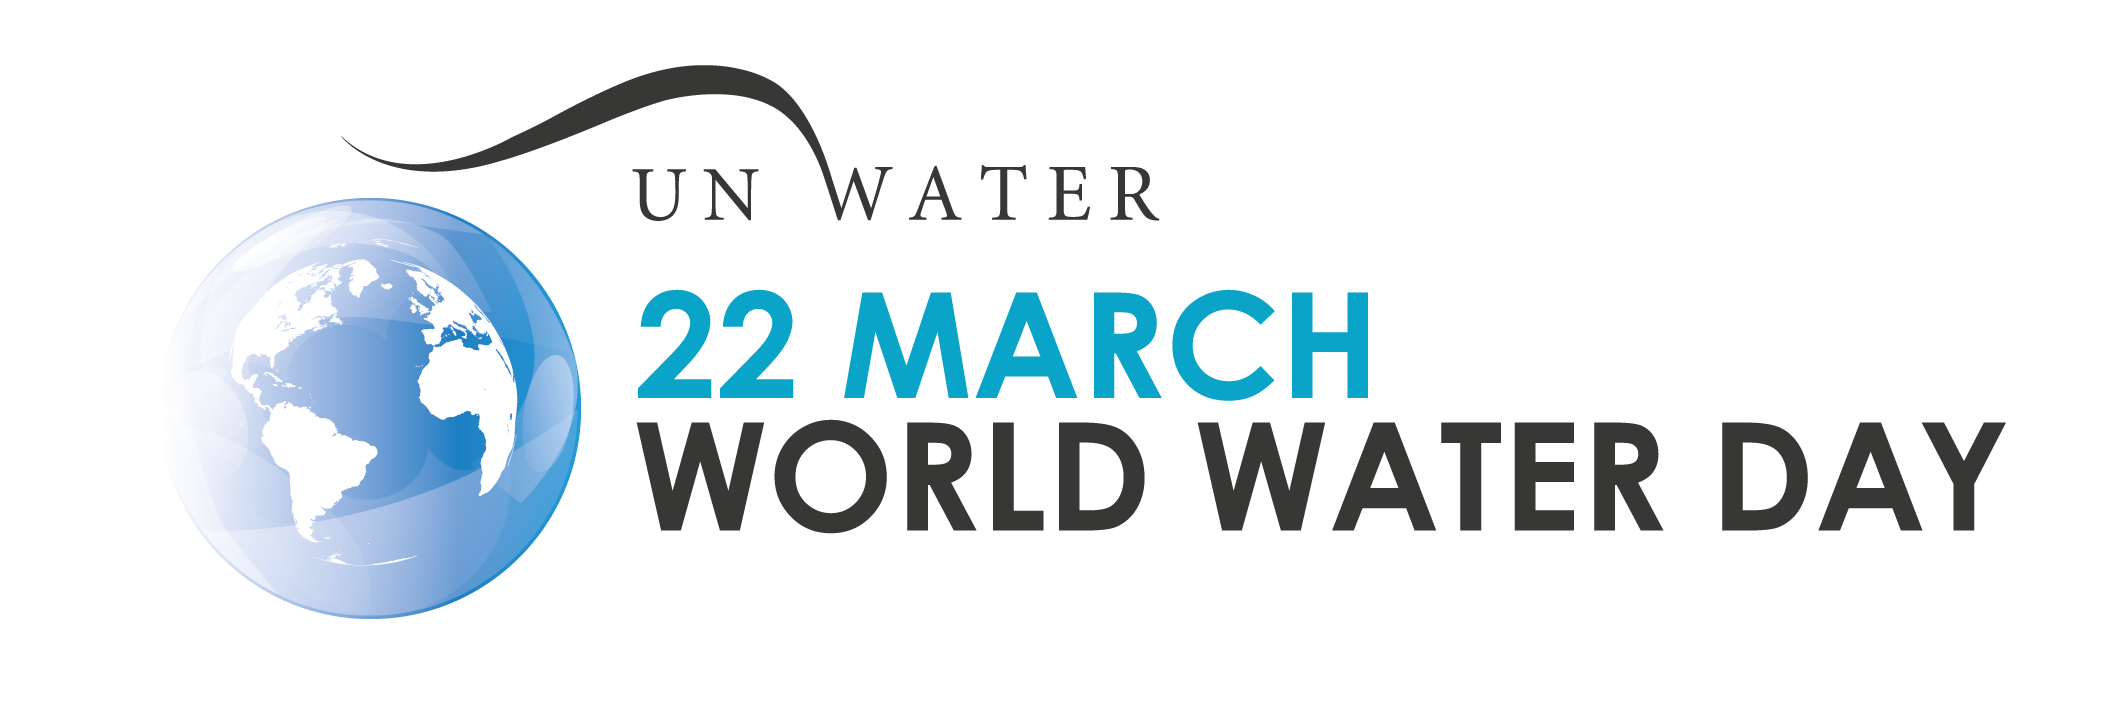 UN World Water Day March 22 with image of the world